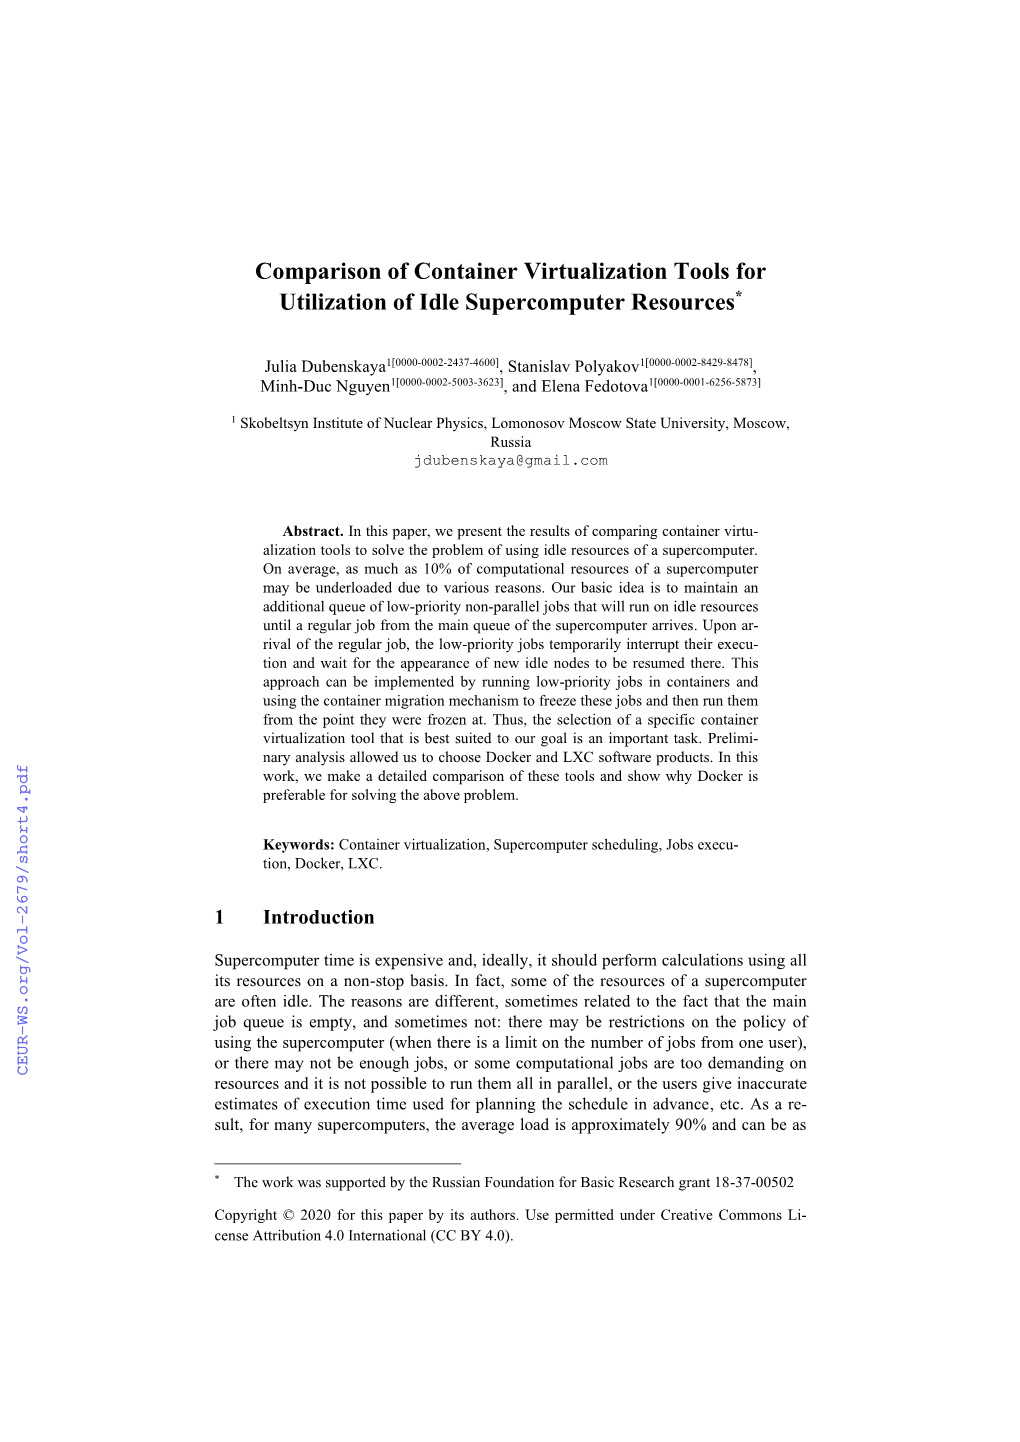 Comparison of Container Virtualization Tools for Utilization of Idle Supercomputer Resources*